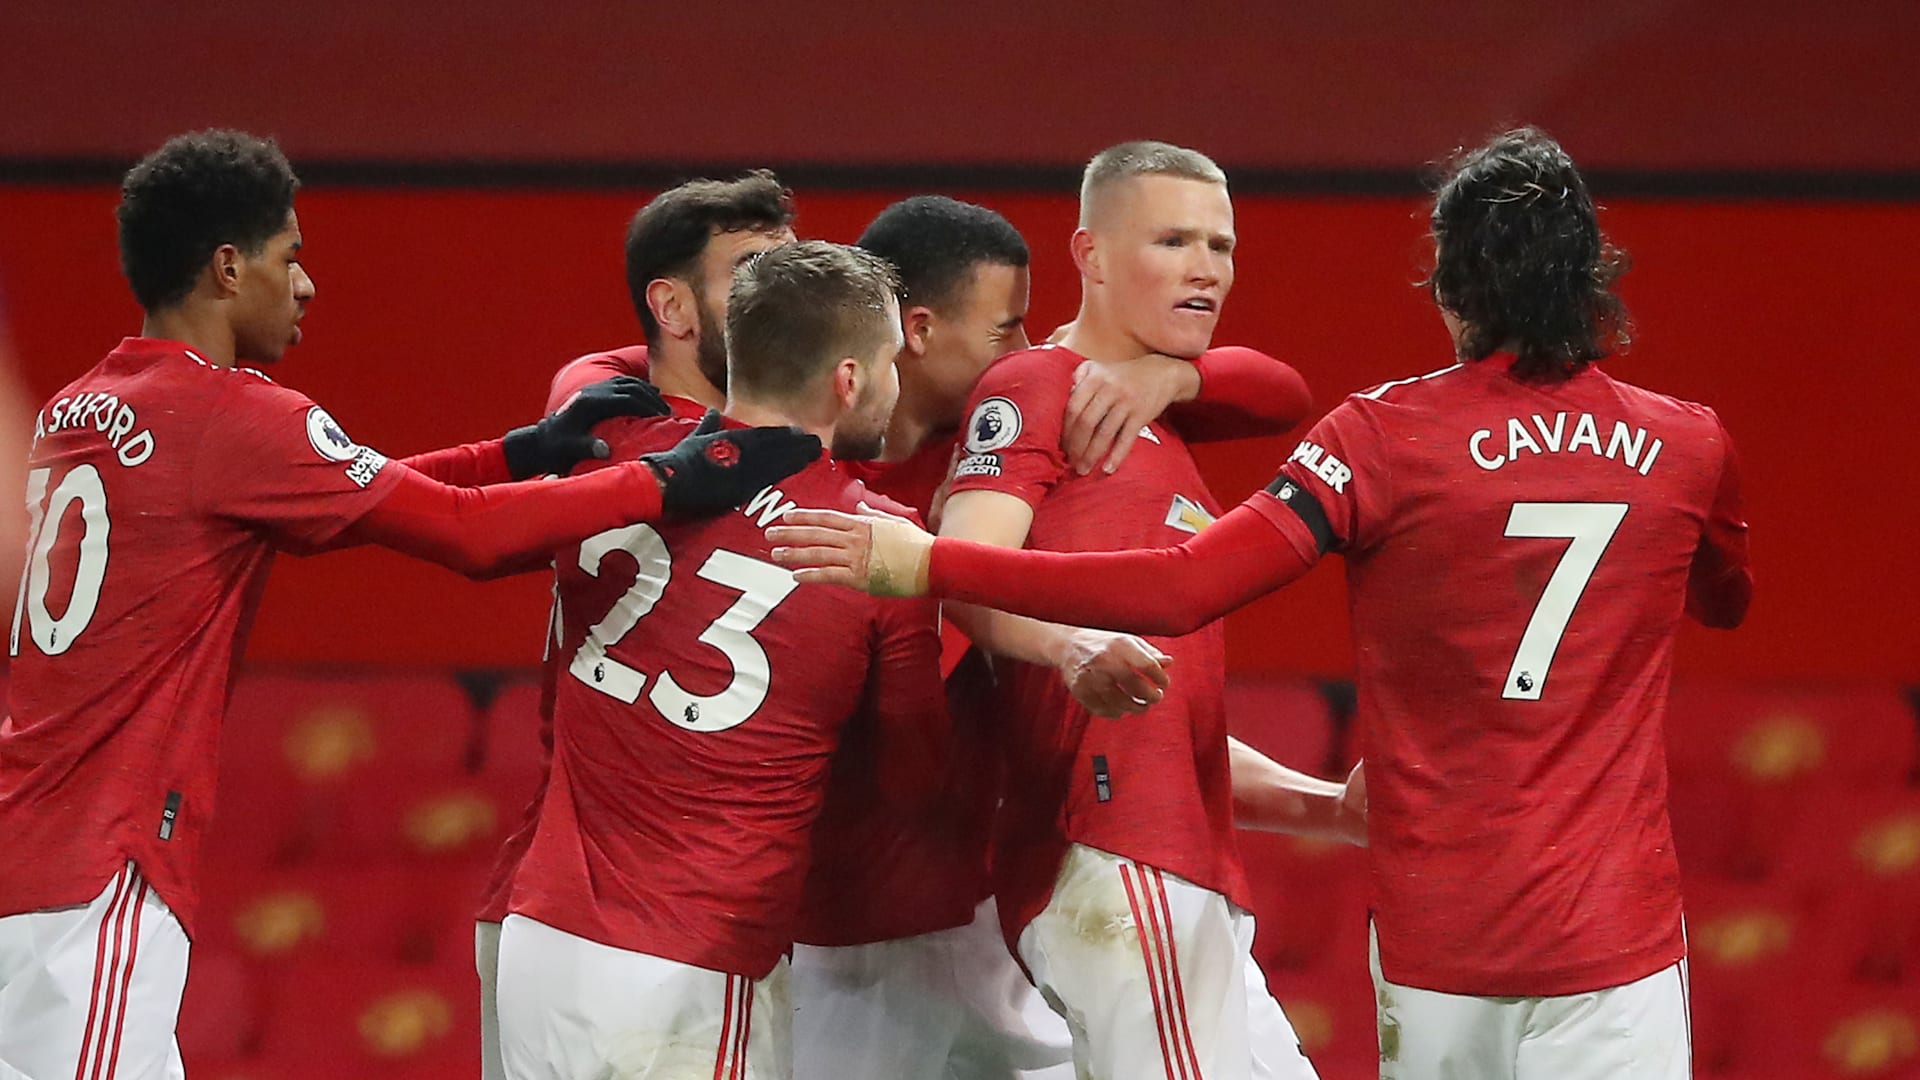 Uefa Europa League 2020 21 Real Sociedad Vs Manchester United And Round Of 32 Leg 1 Fixtures Where To Watch Live Streaming And Telecast In India